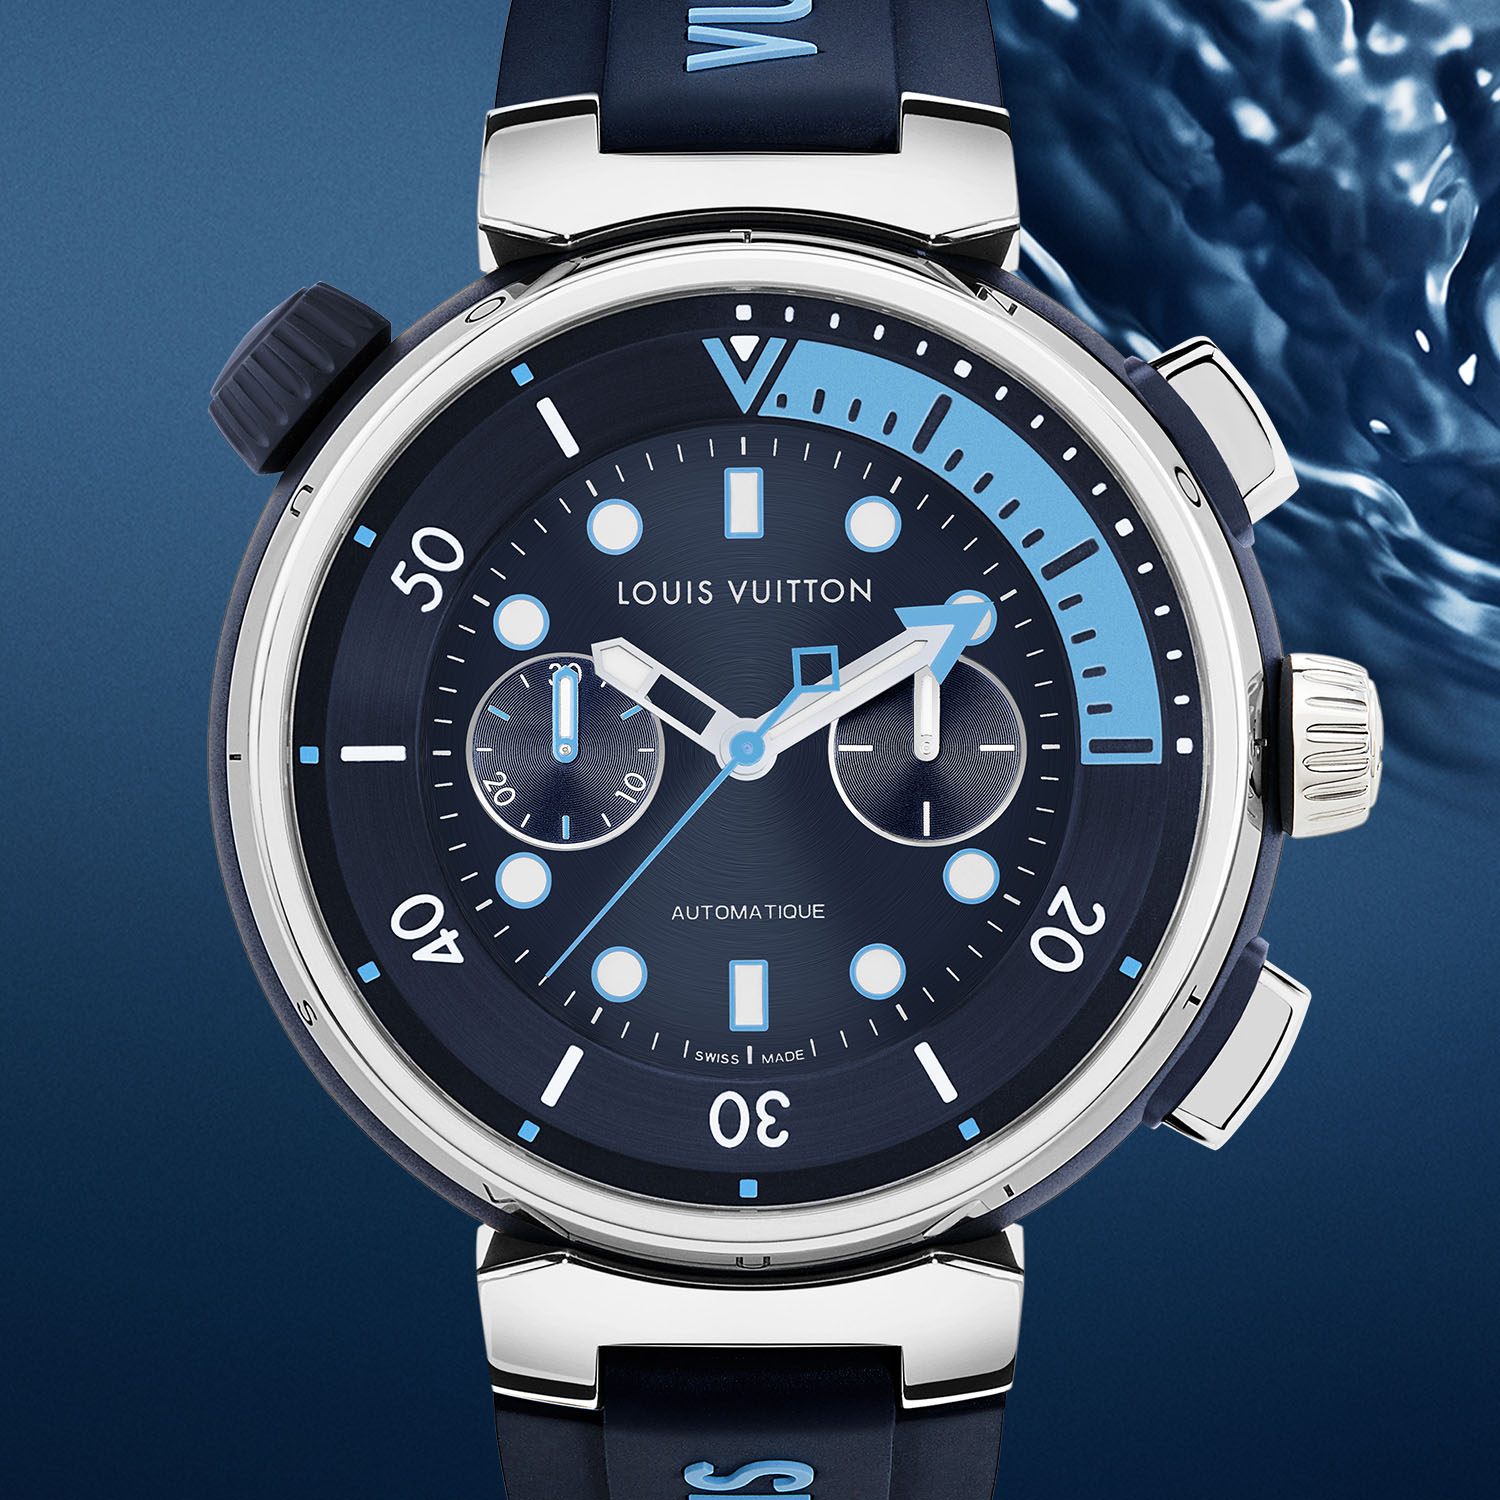 Introducing The Louis Vuitton Tambour Street Diver Chronograph Watches –   – Featuring Watch Reviews, Critiques, Reports & News